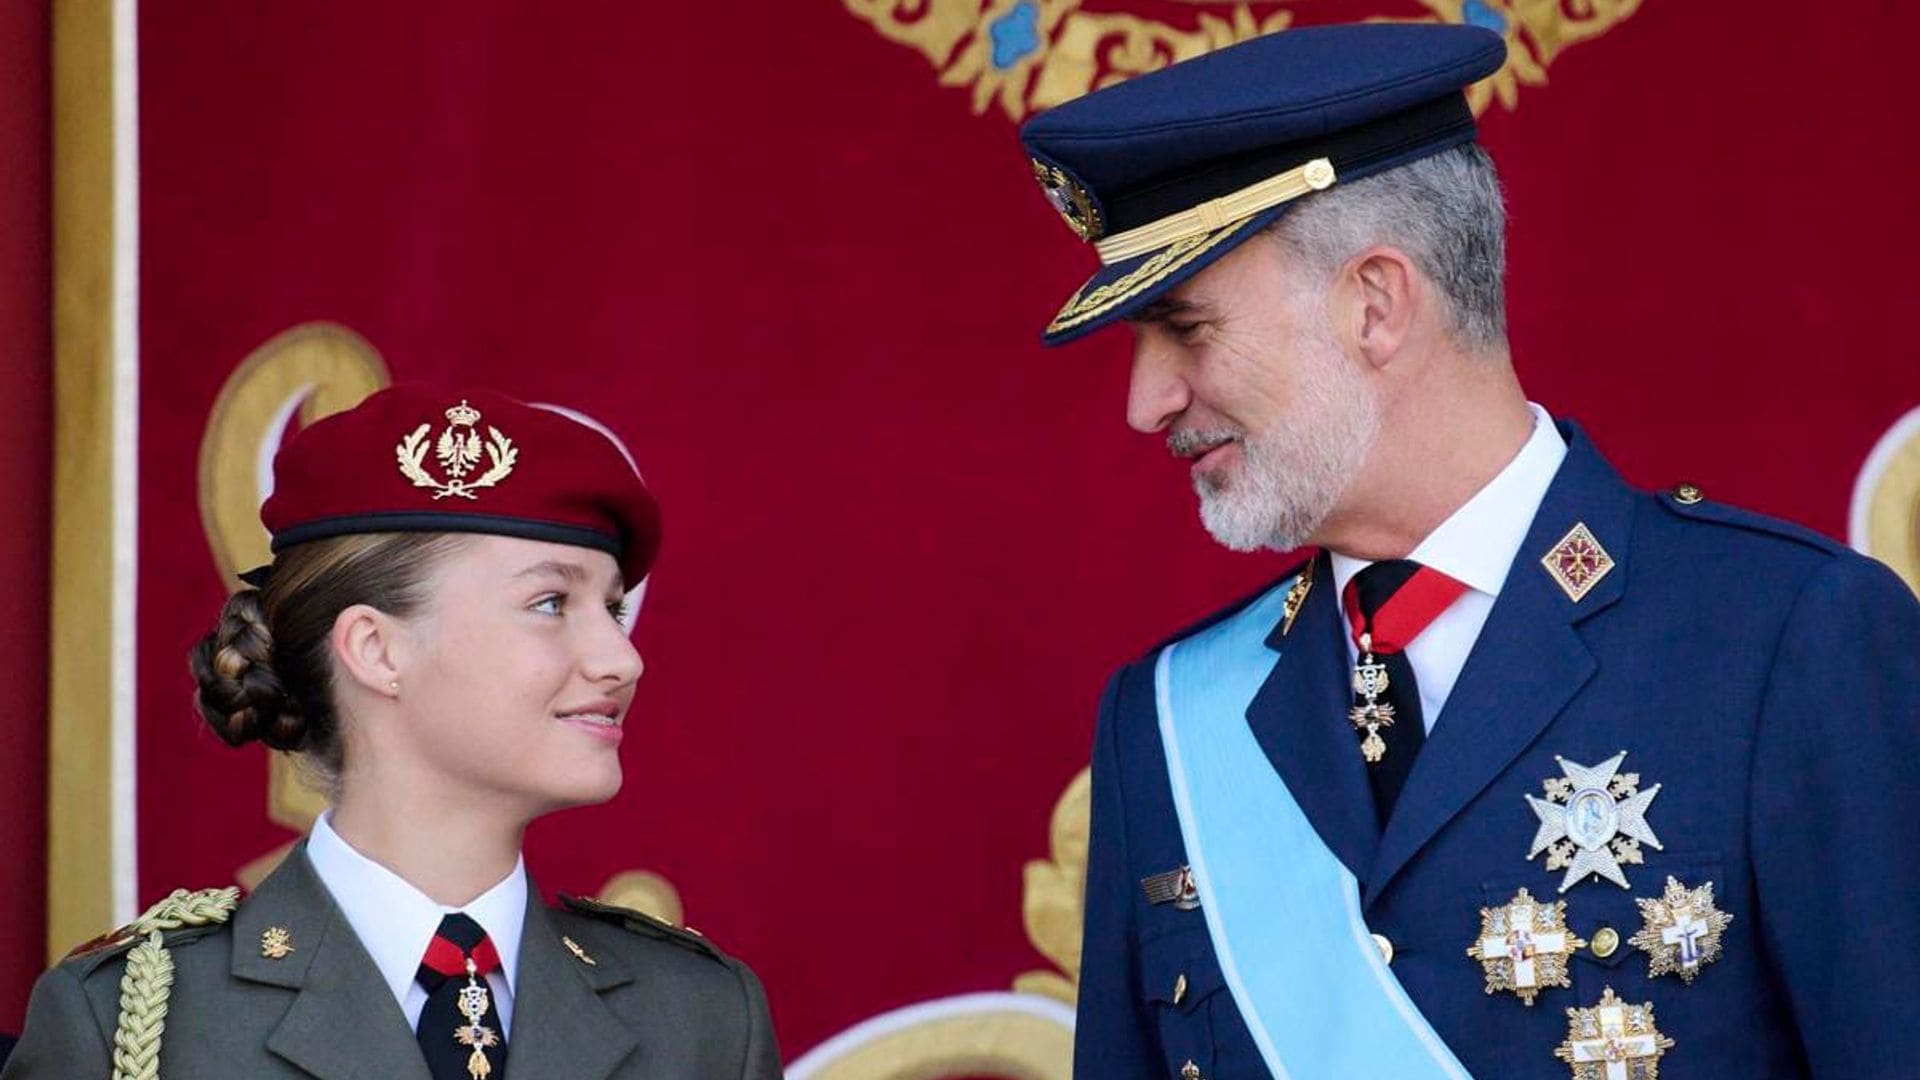 Princess Leonor has big day of firsts on Spain’s National Day